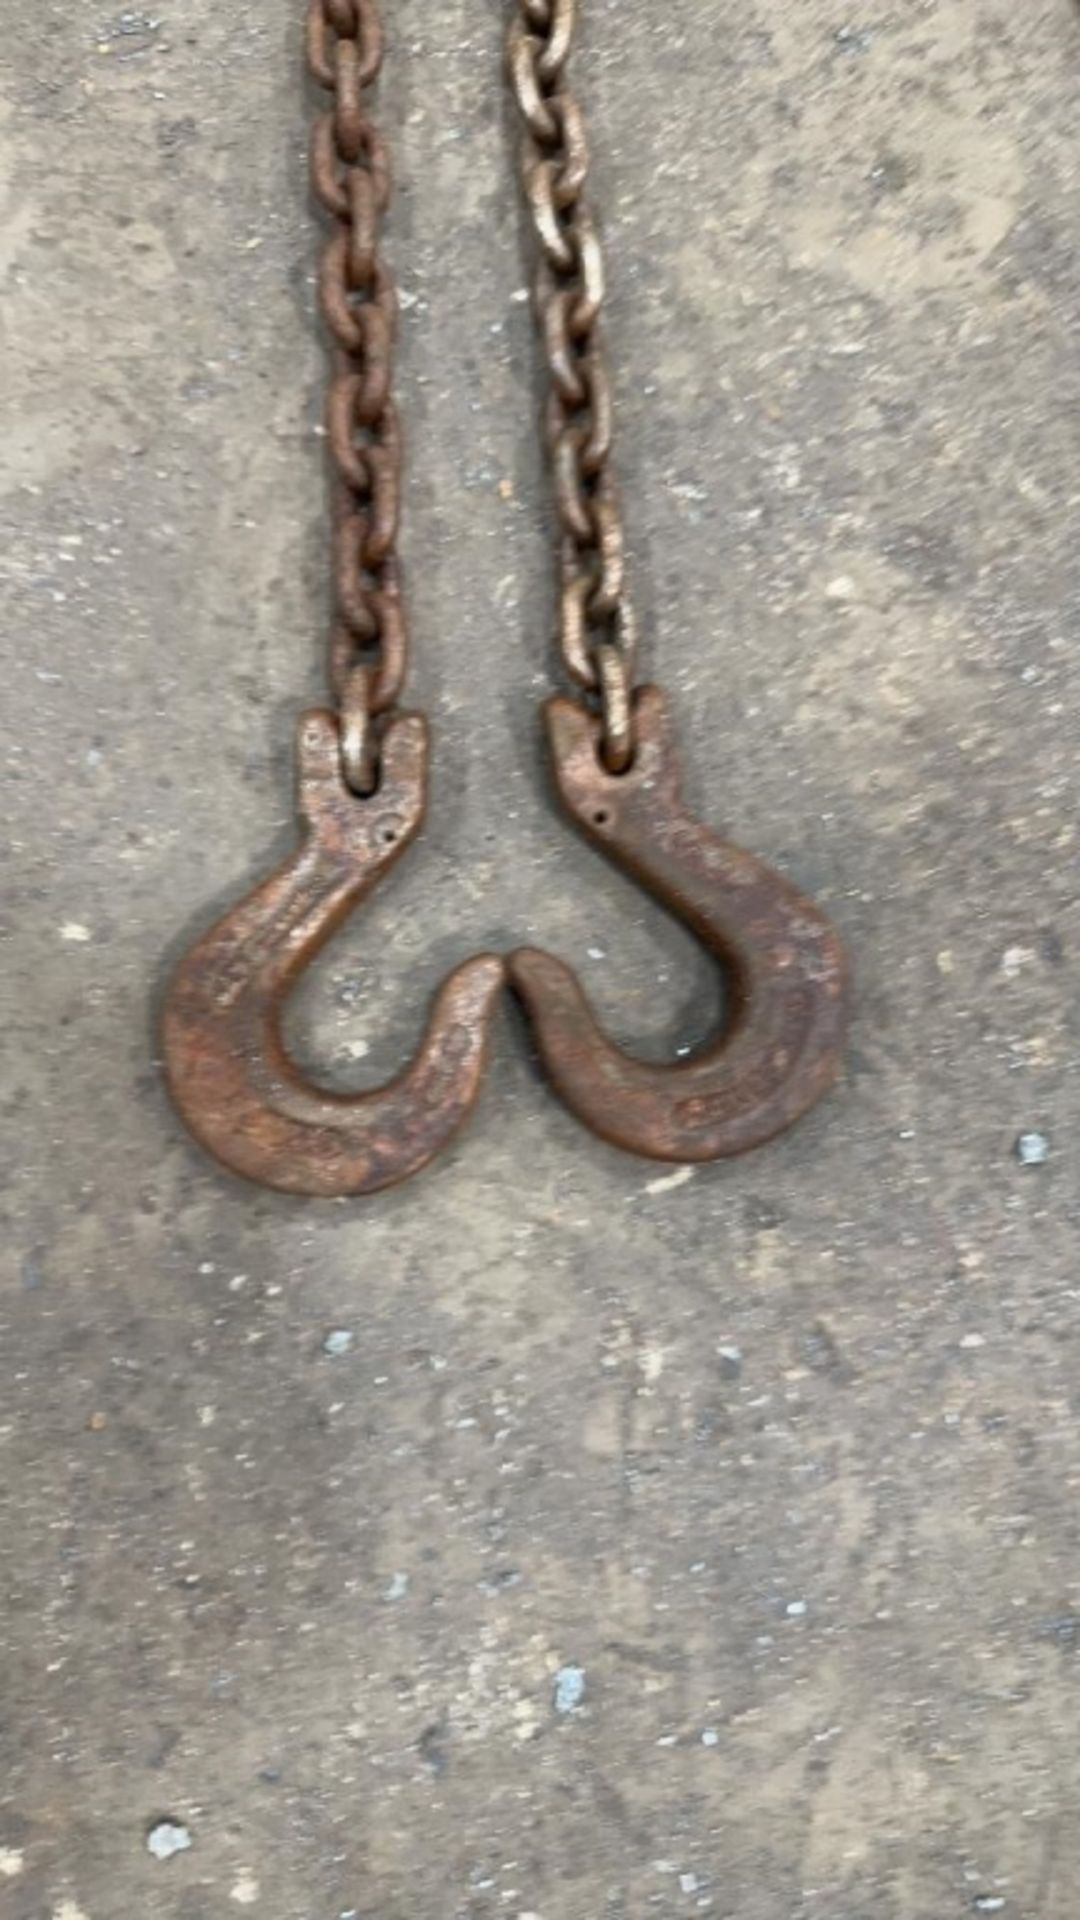 4ft & 2ft Chains on Rigging Rings with Hoist Hooks - Image 8 of 8